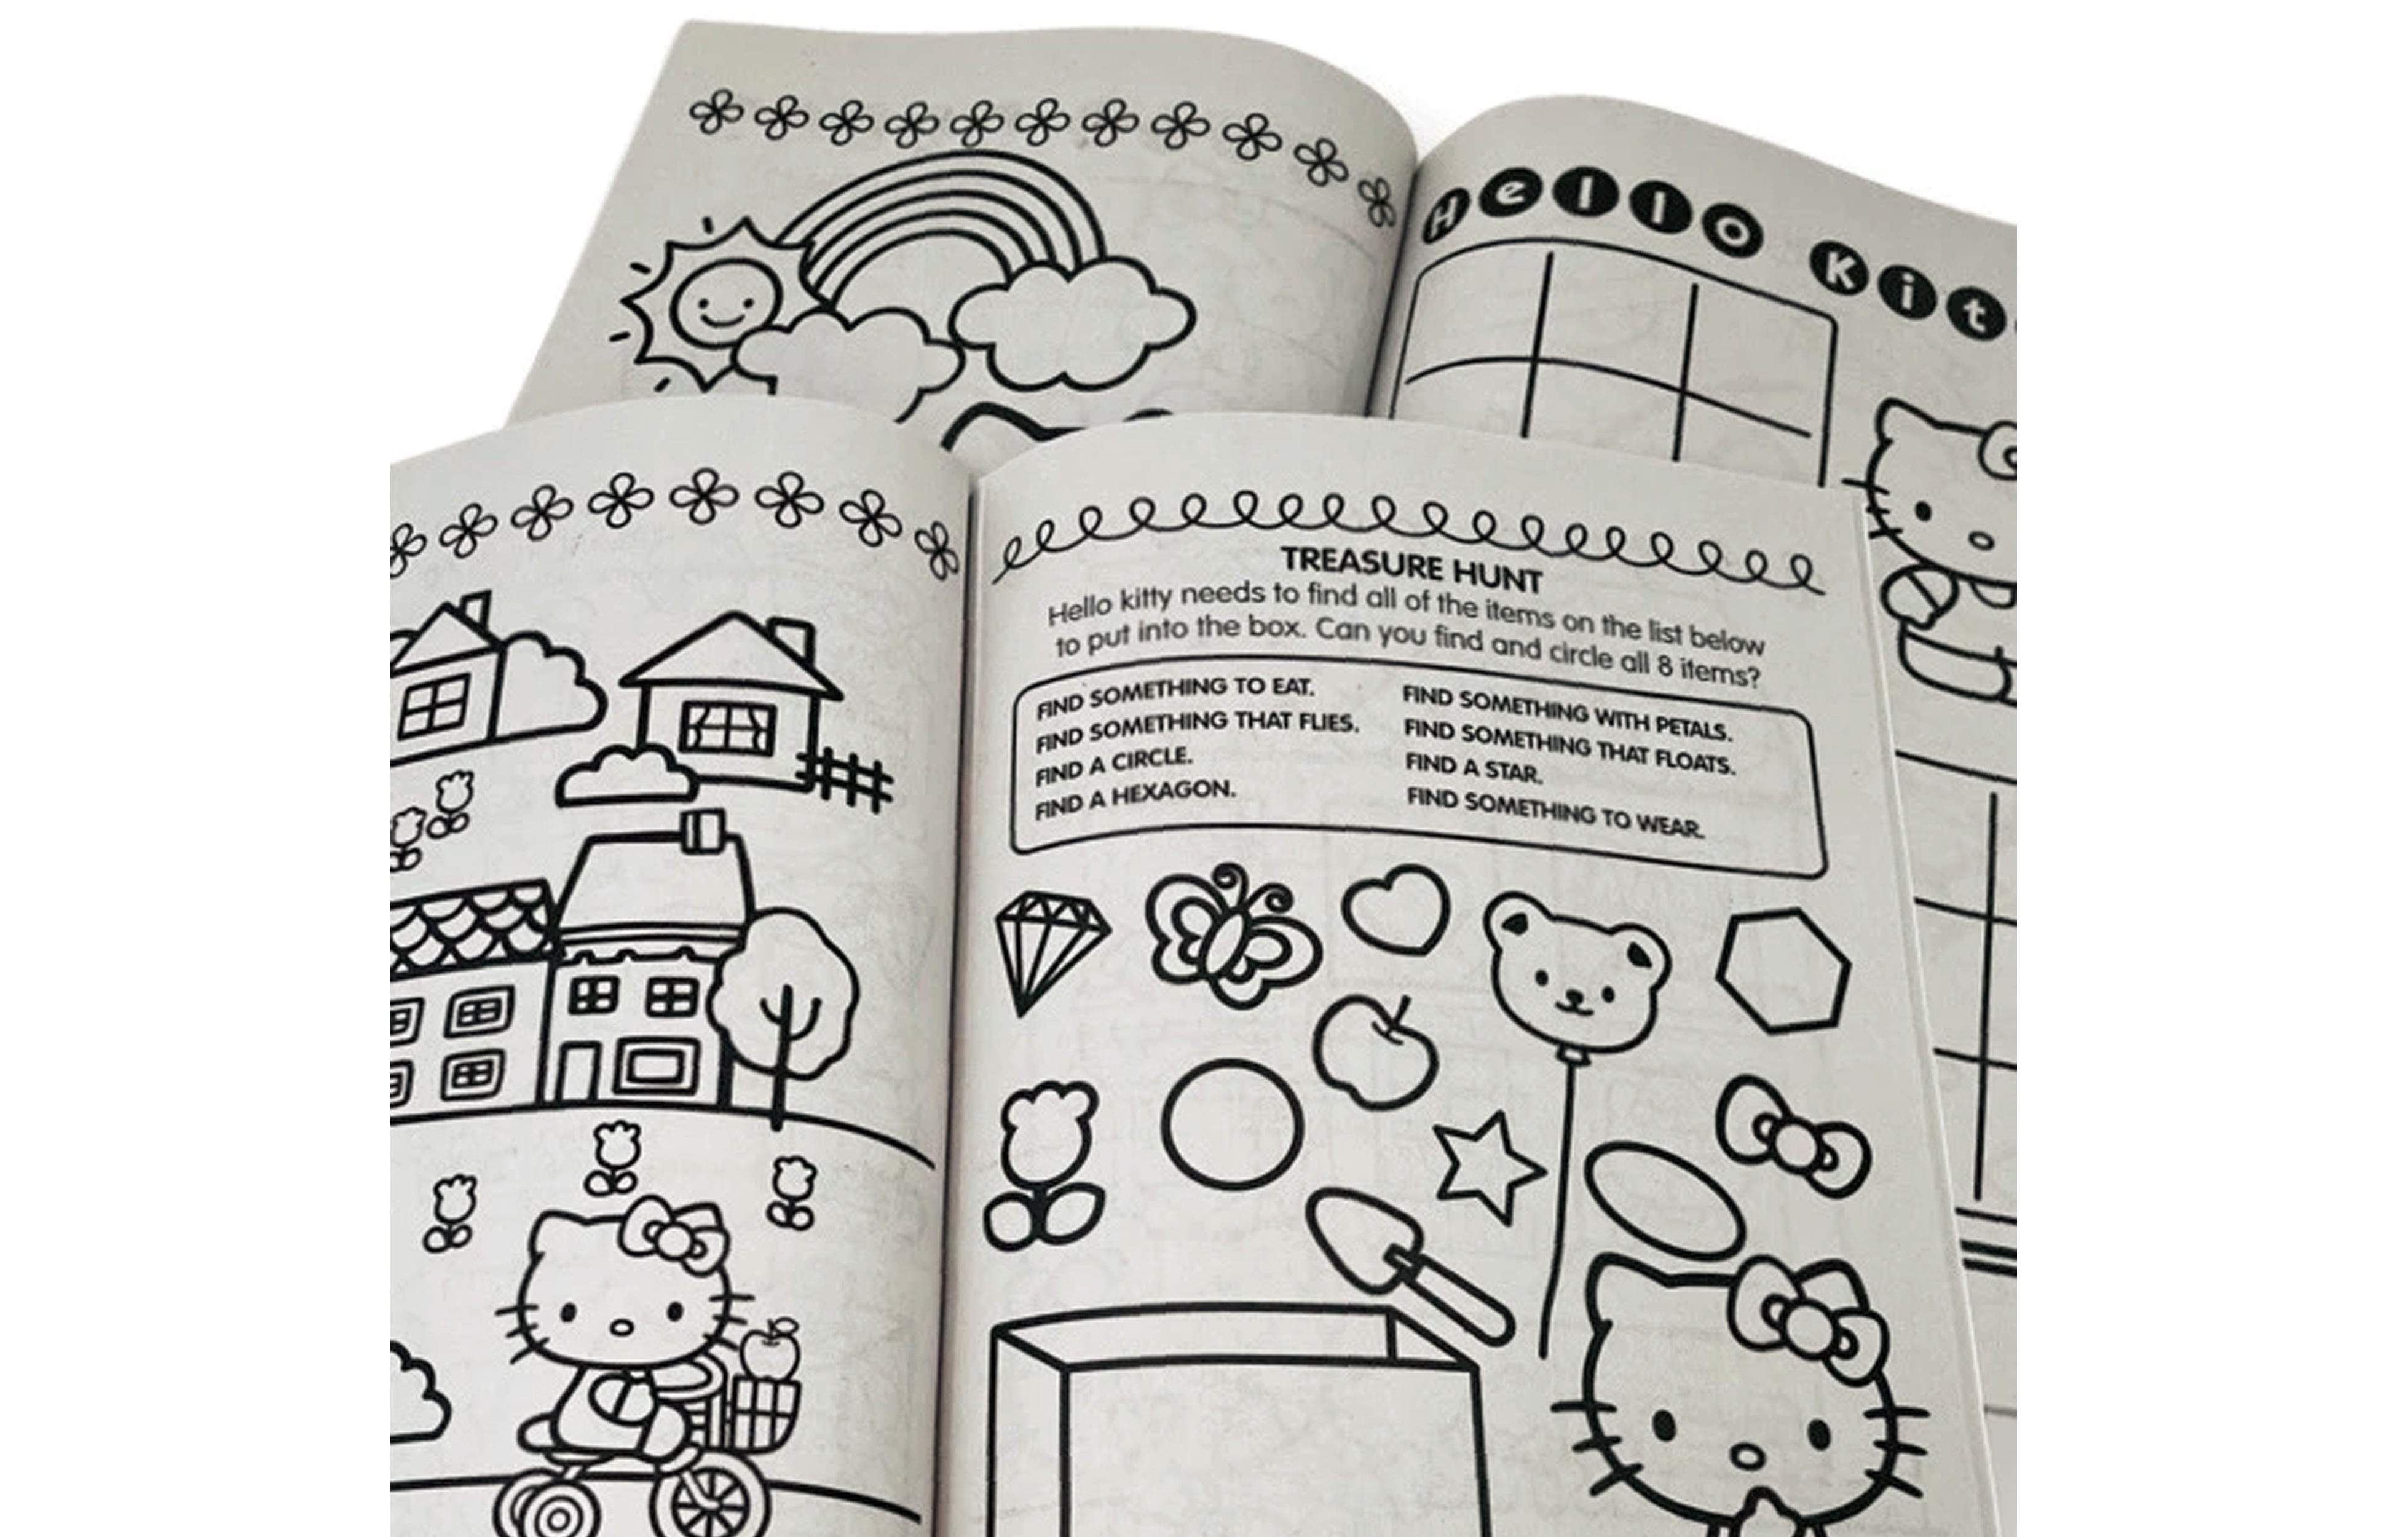  Hello Kitty Coloring Pages